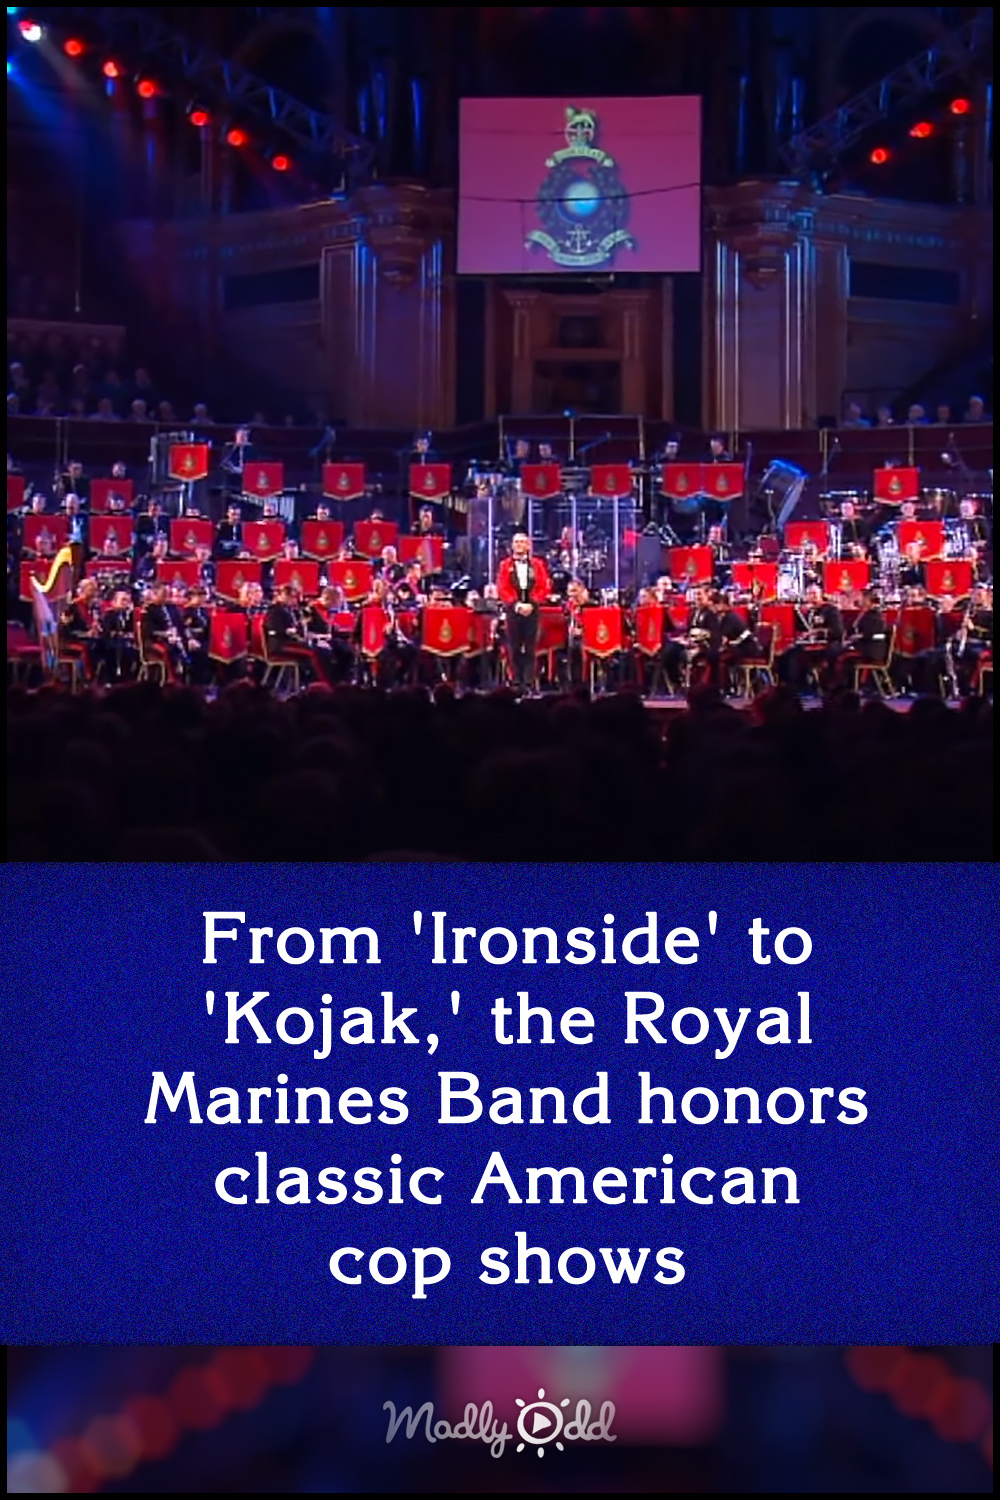 From \'Ironside\' to \'Kojak,\' the Royal Marines Band honors classic American cop shows